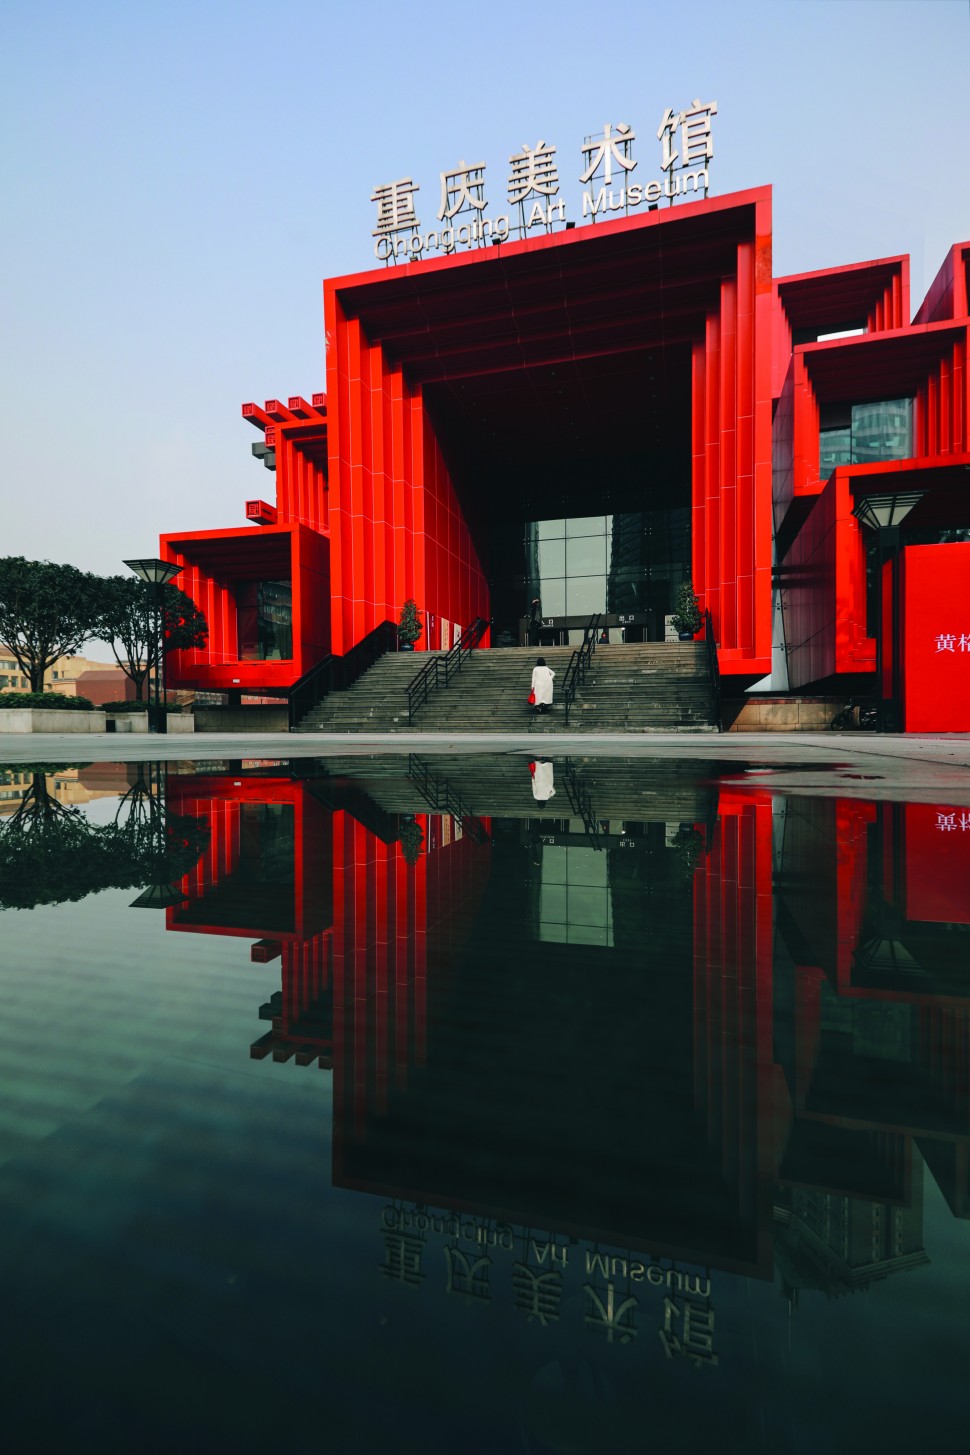 The city loves its architecture striking and attention-grabbing such as this, the Chongqing Art Museum, which perhaps explains why red is the most commonly used color in many of its structures